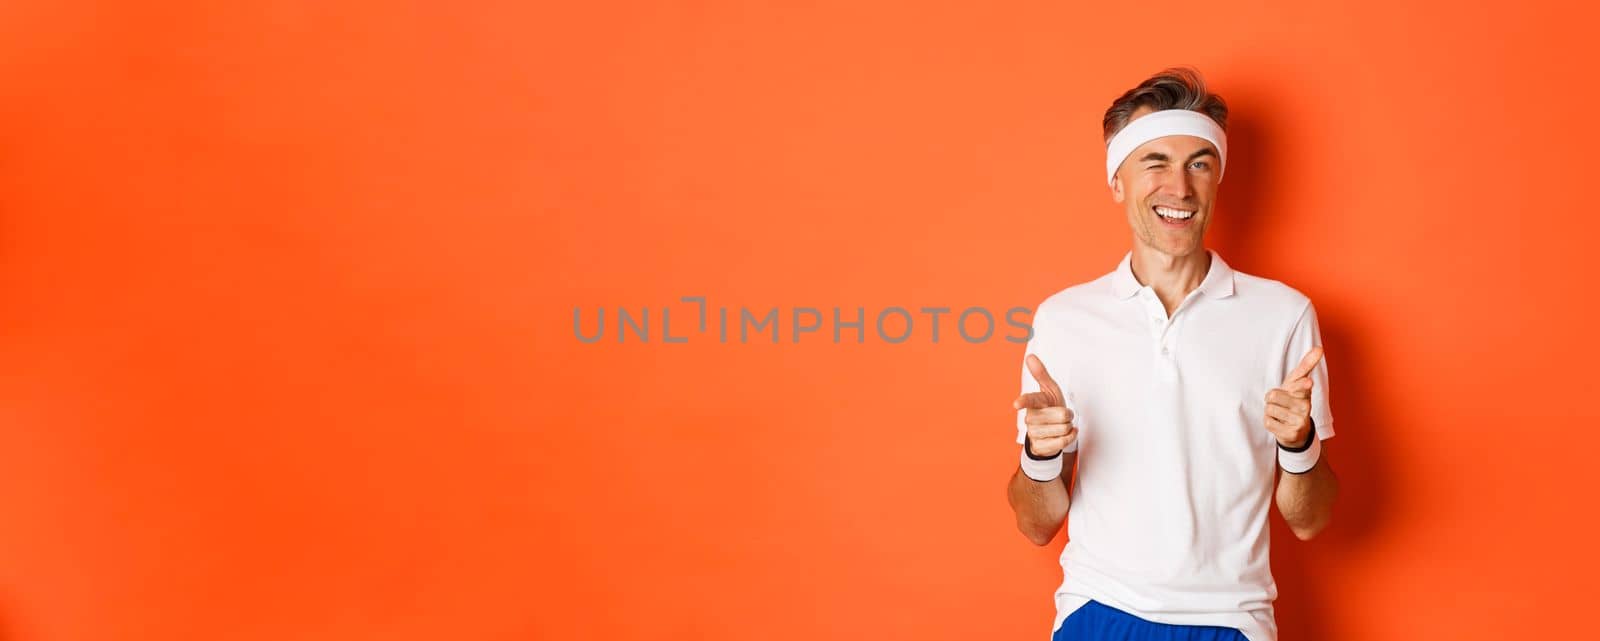 Concept of sport, fitness and lifestyle. Portrait of confident, handsome middle-aged man in workout uniform, pointing fingers at camera and smiling, inviting to gym, standing over orange background.